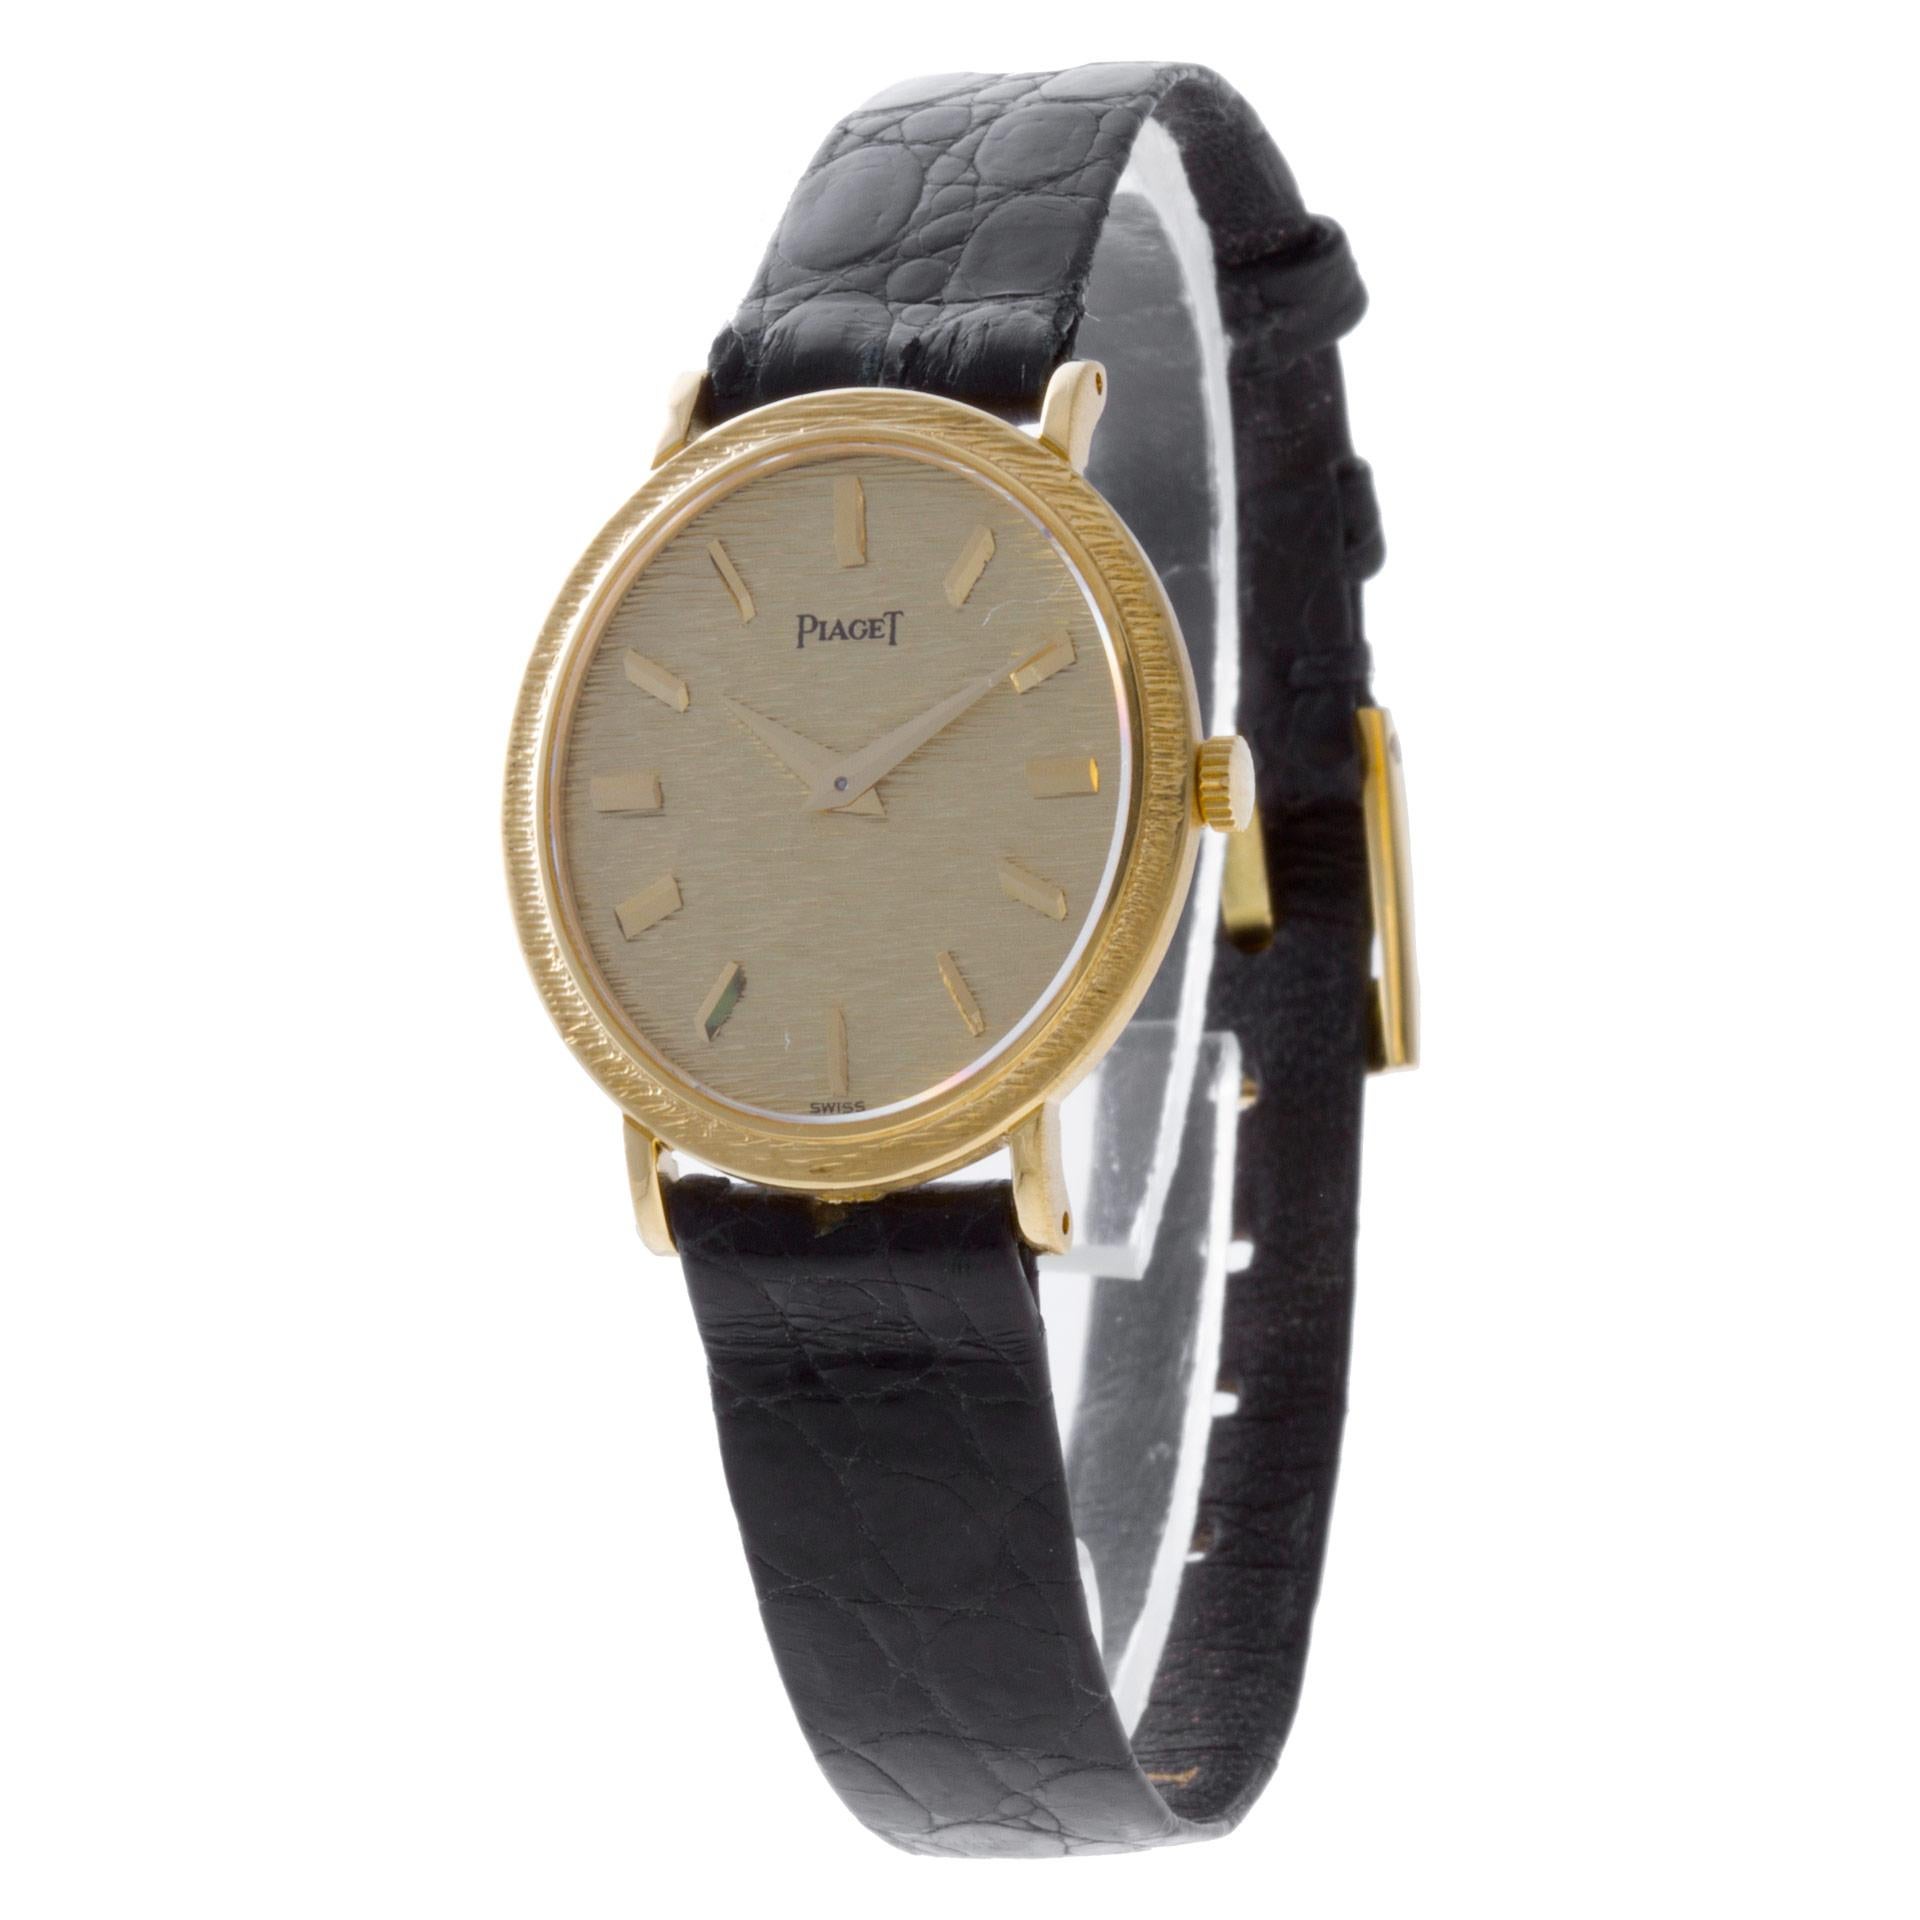 Ladies Piaget Oval watch in 18k on the leather strap with original 18k tang buckle. Manual. With original box and papers dated 1978. Ref 9821. 17mm x 27mm case size. Fine Pre-owned Piaget Watch.   Certified preowned Classic Piaget Oval 9821 watch is